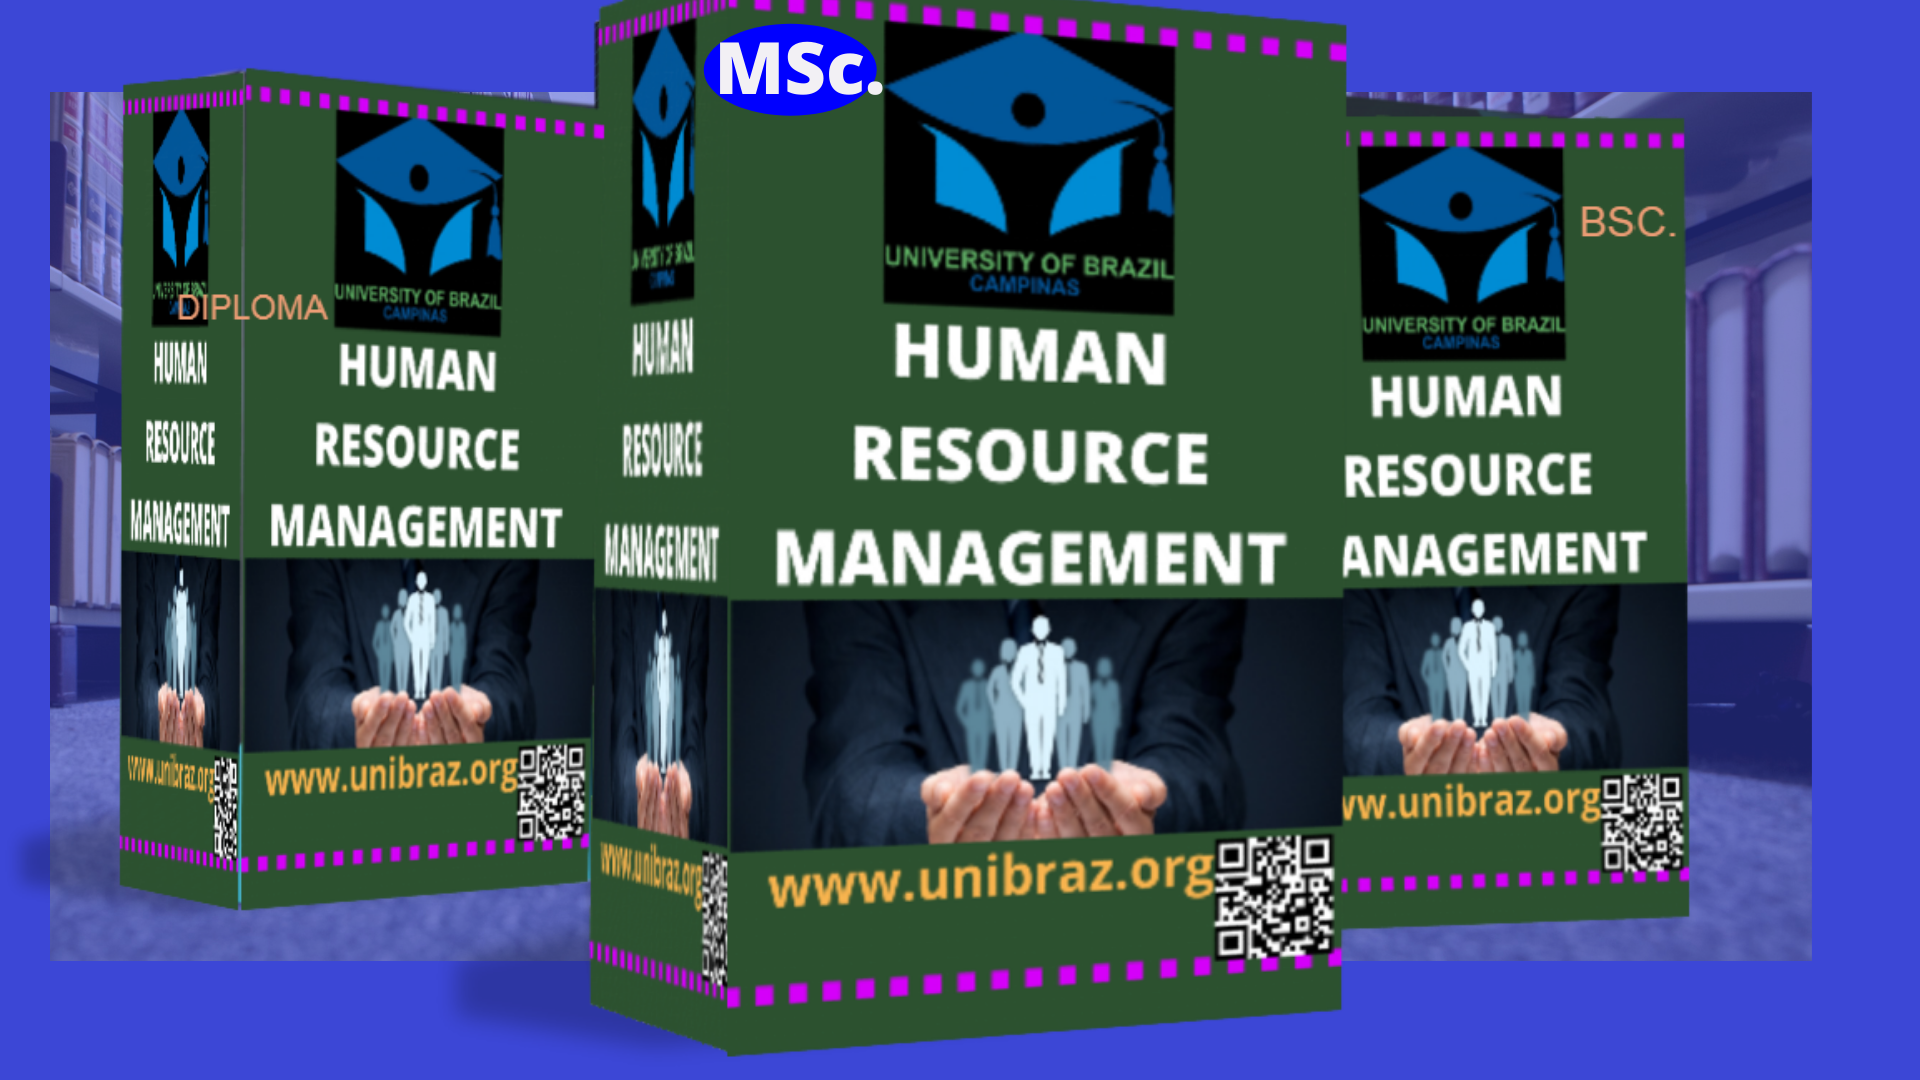 MASTERS OF SCIENCE (MSc.) HUMAN RESOURCE MANAGEMENT